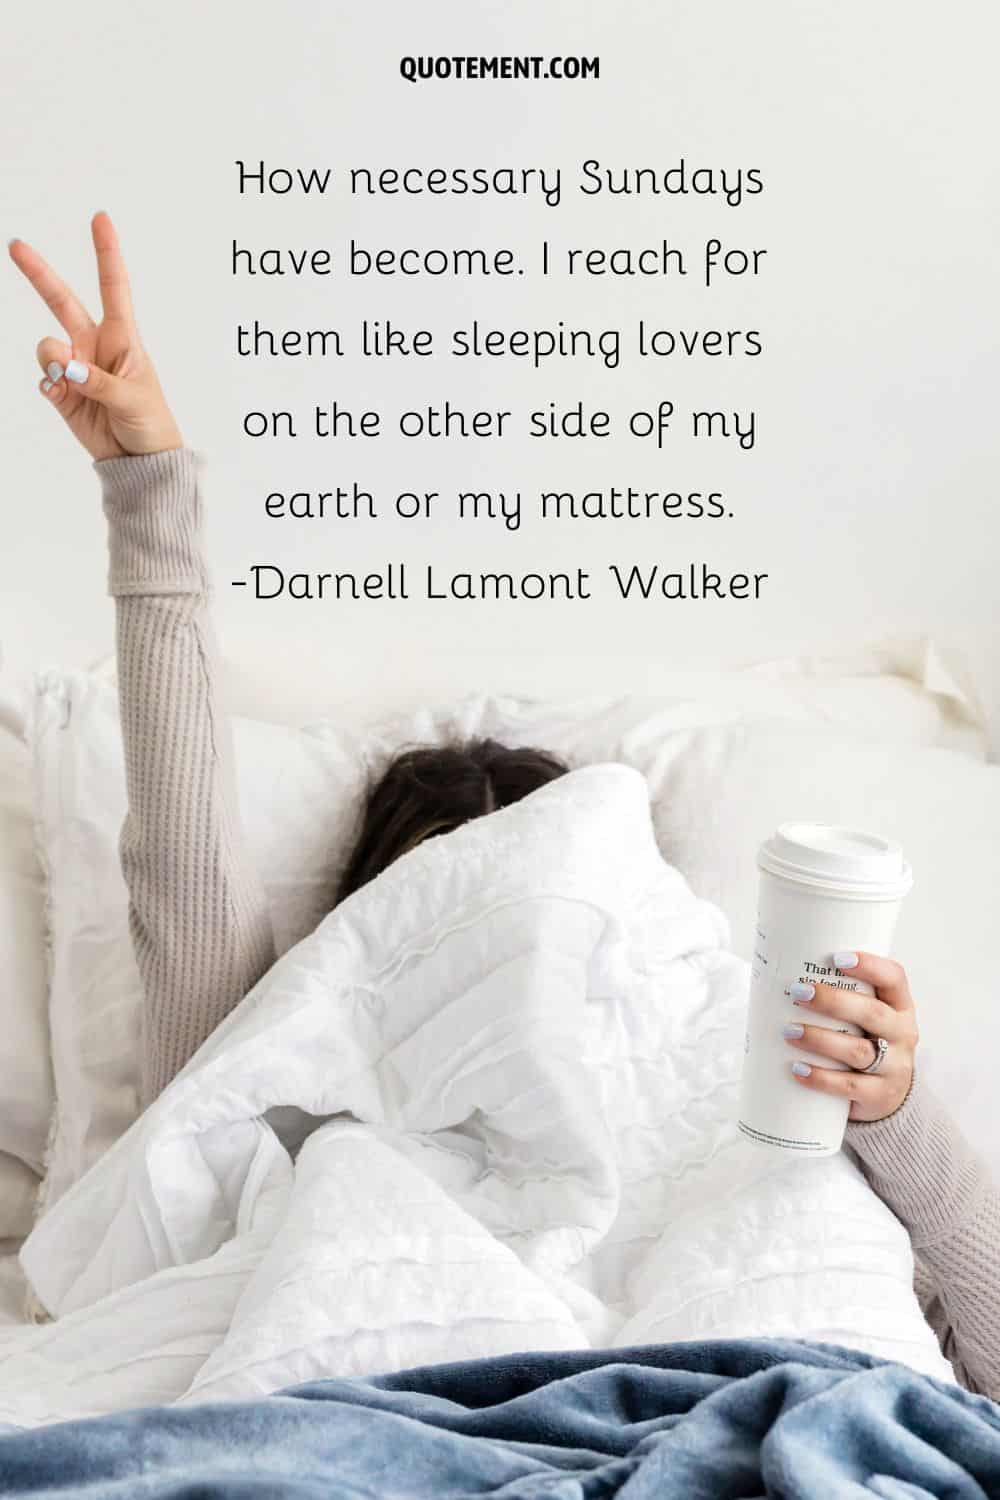 coffee in bed image representing happy Sunday quote